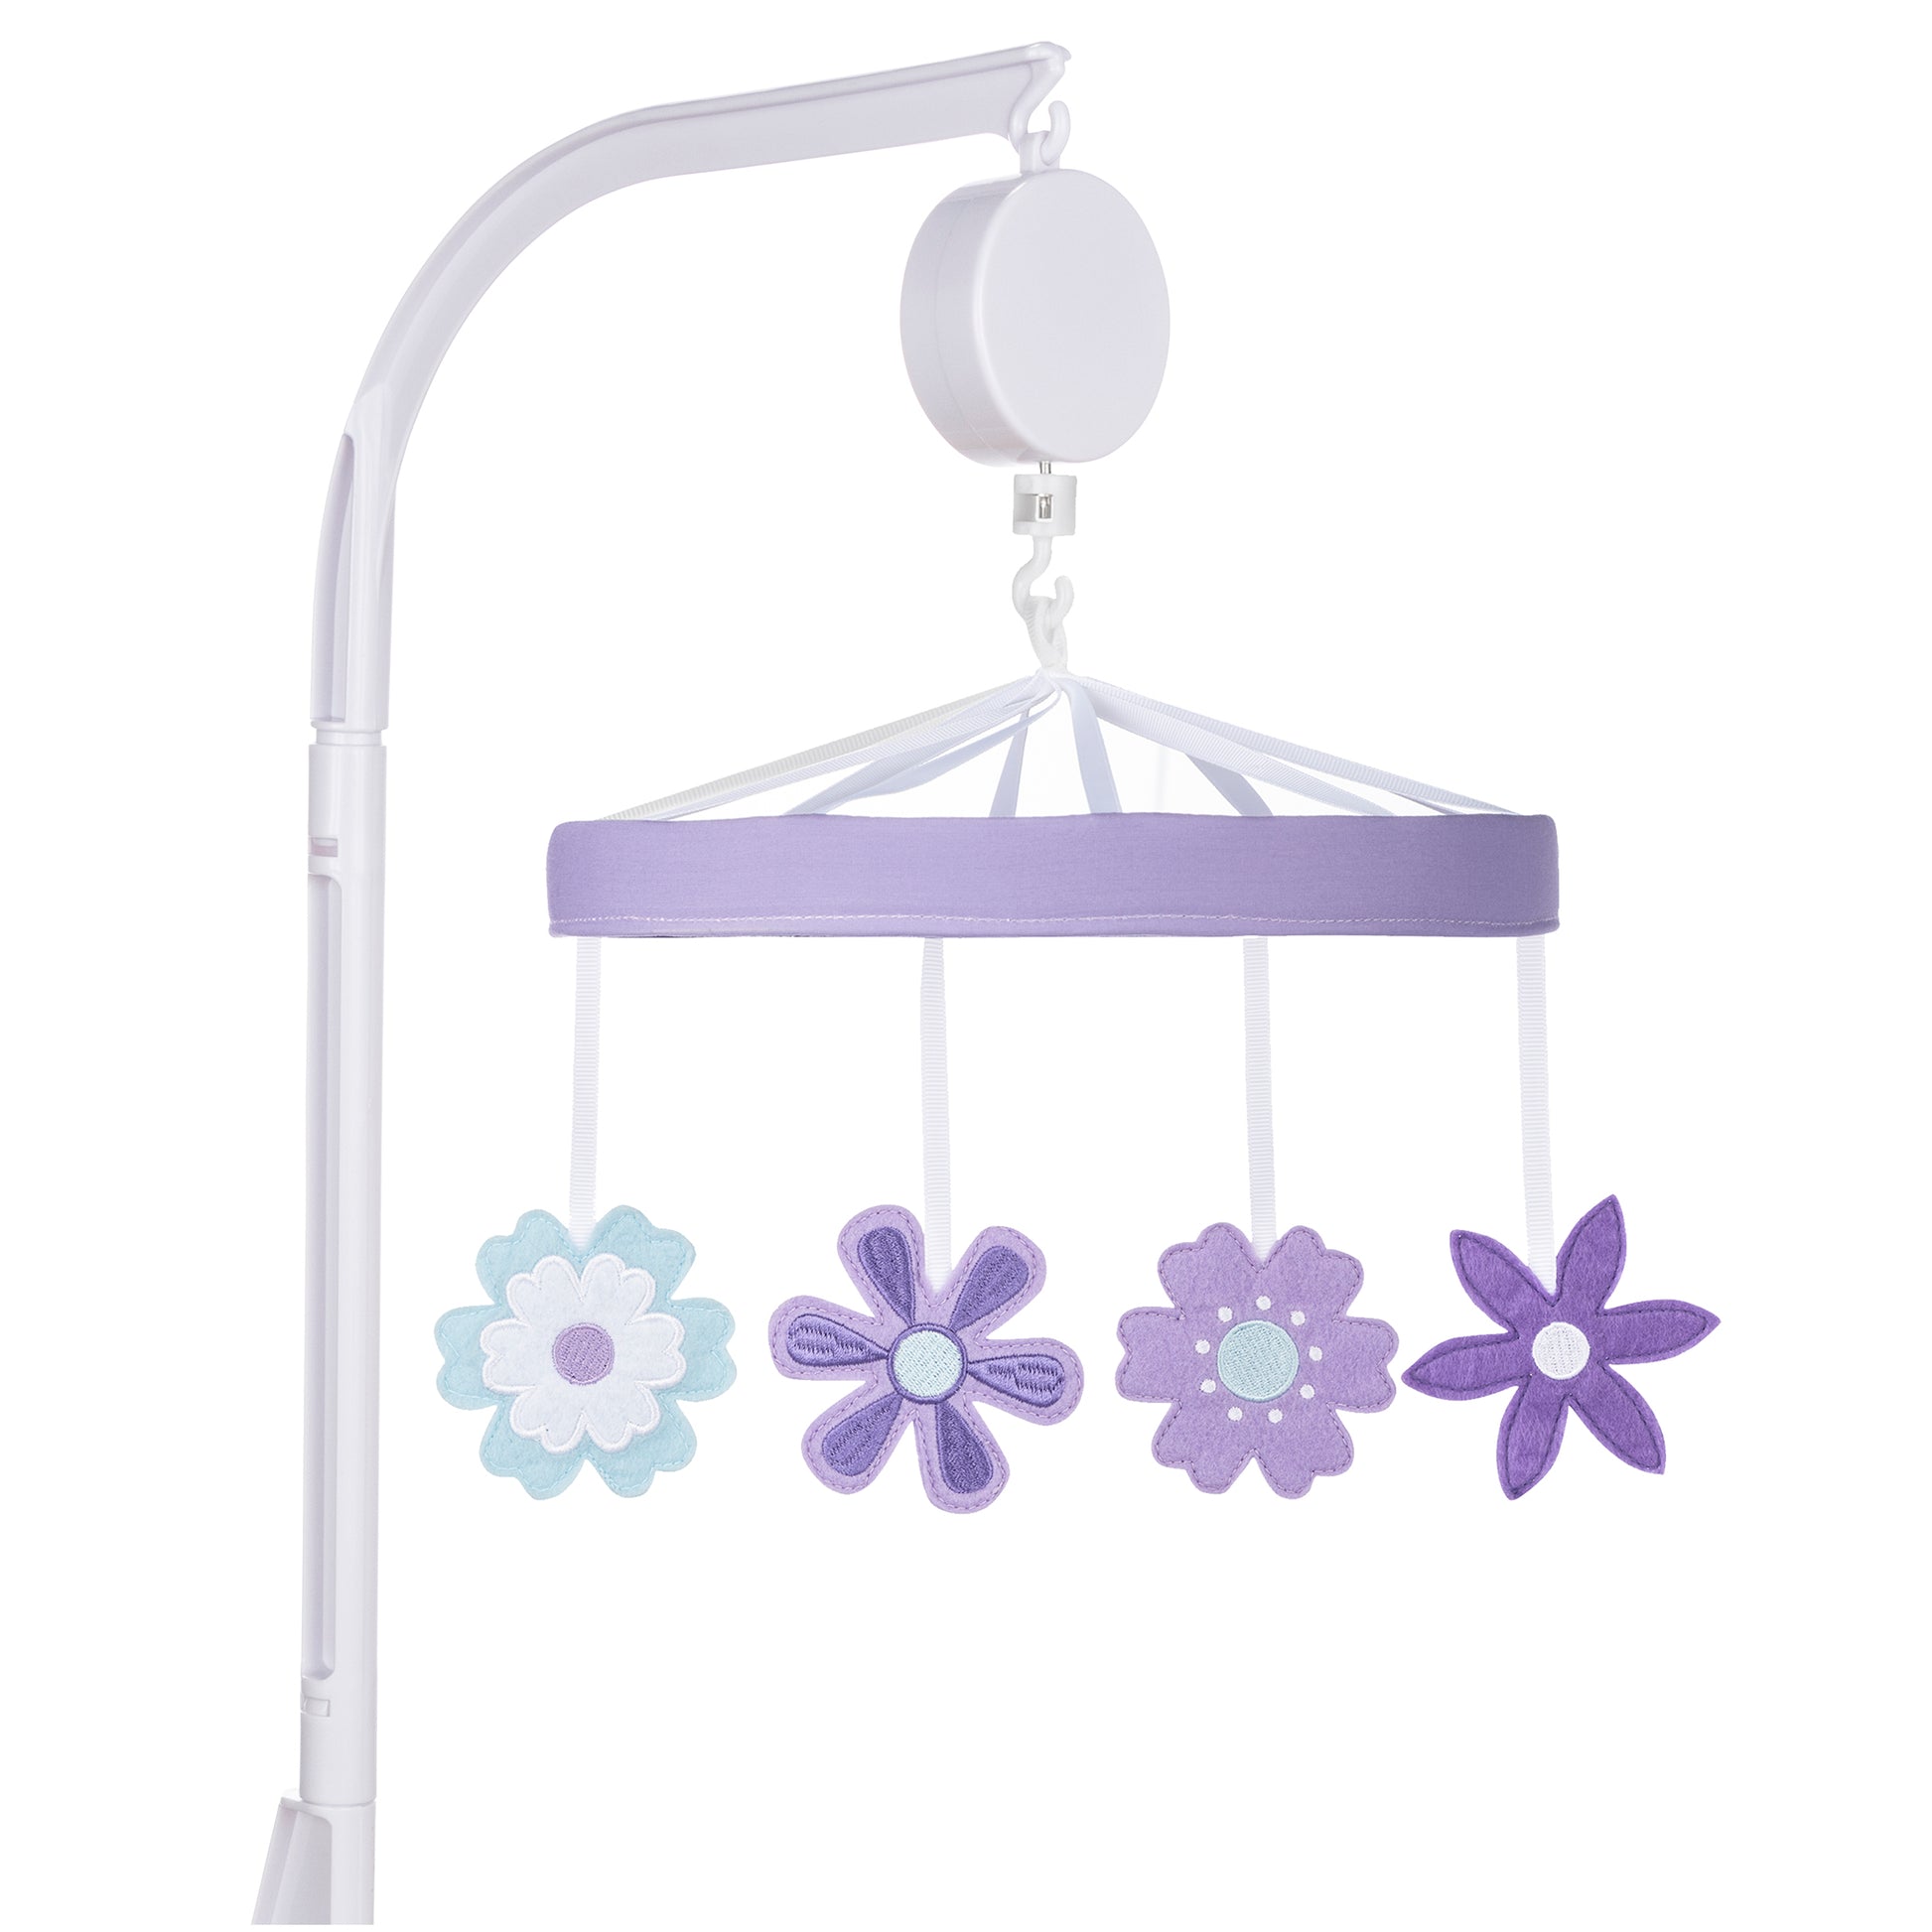 Lilac Flowers Musical Crib Baby Mobile by Sammy & Lou®